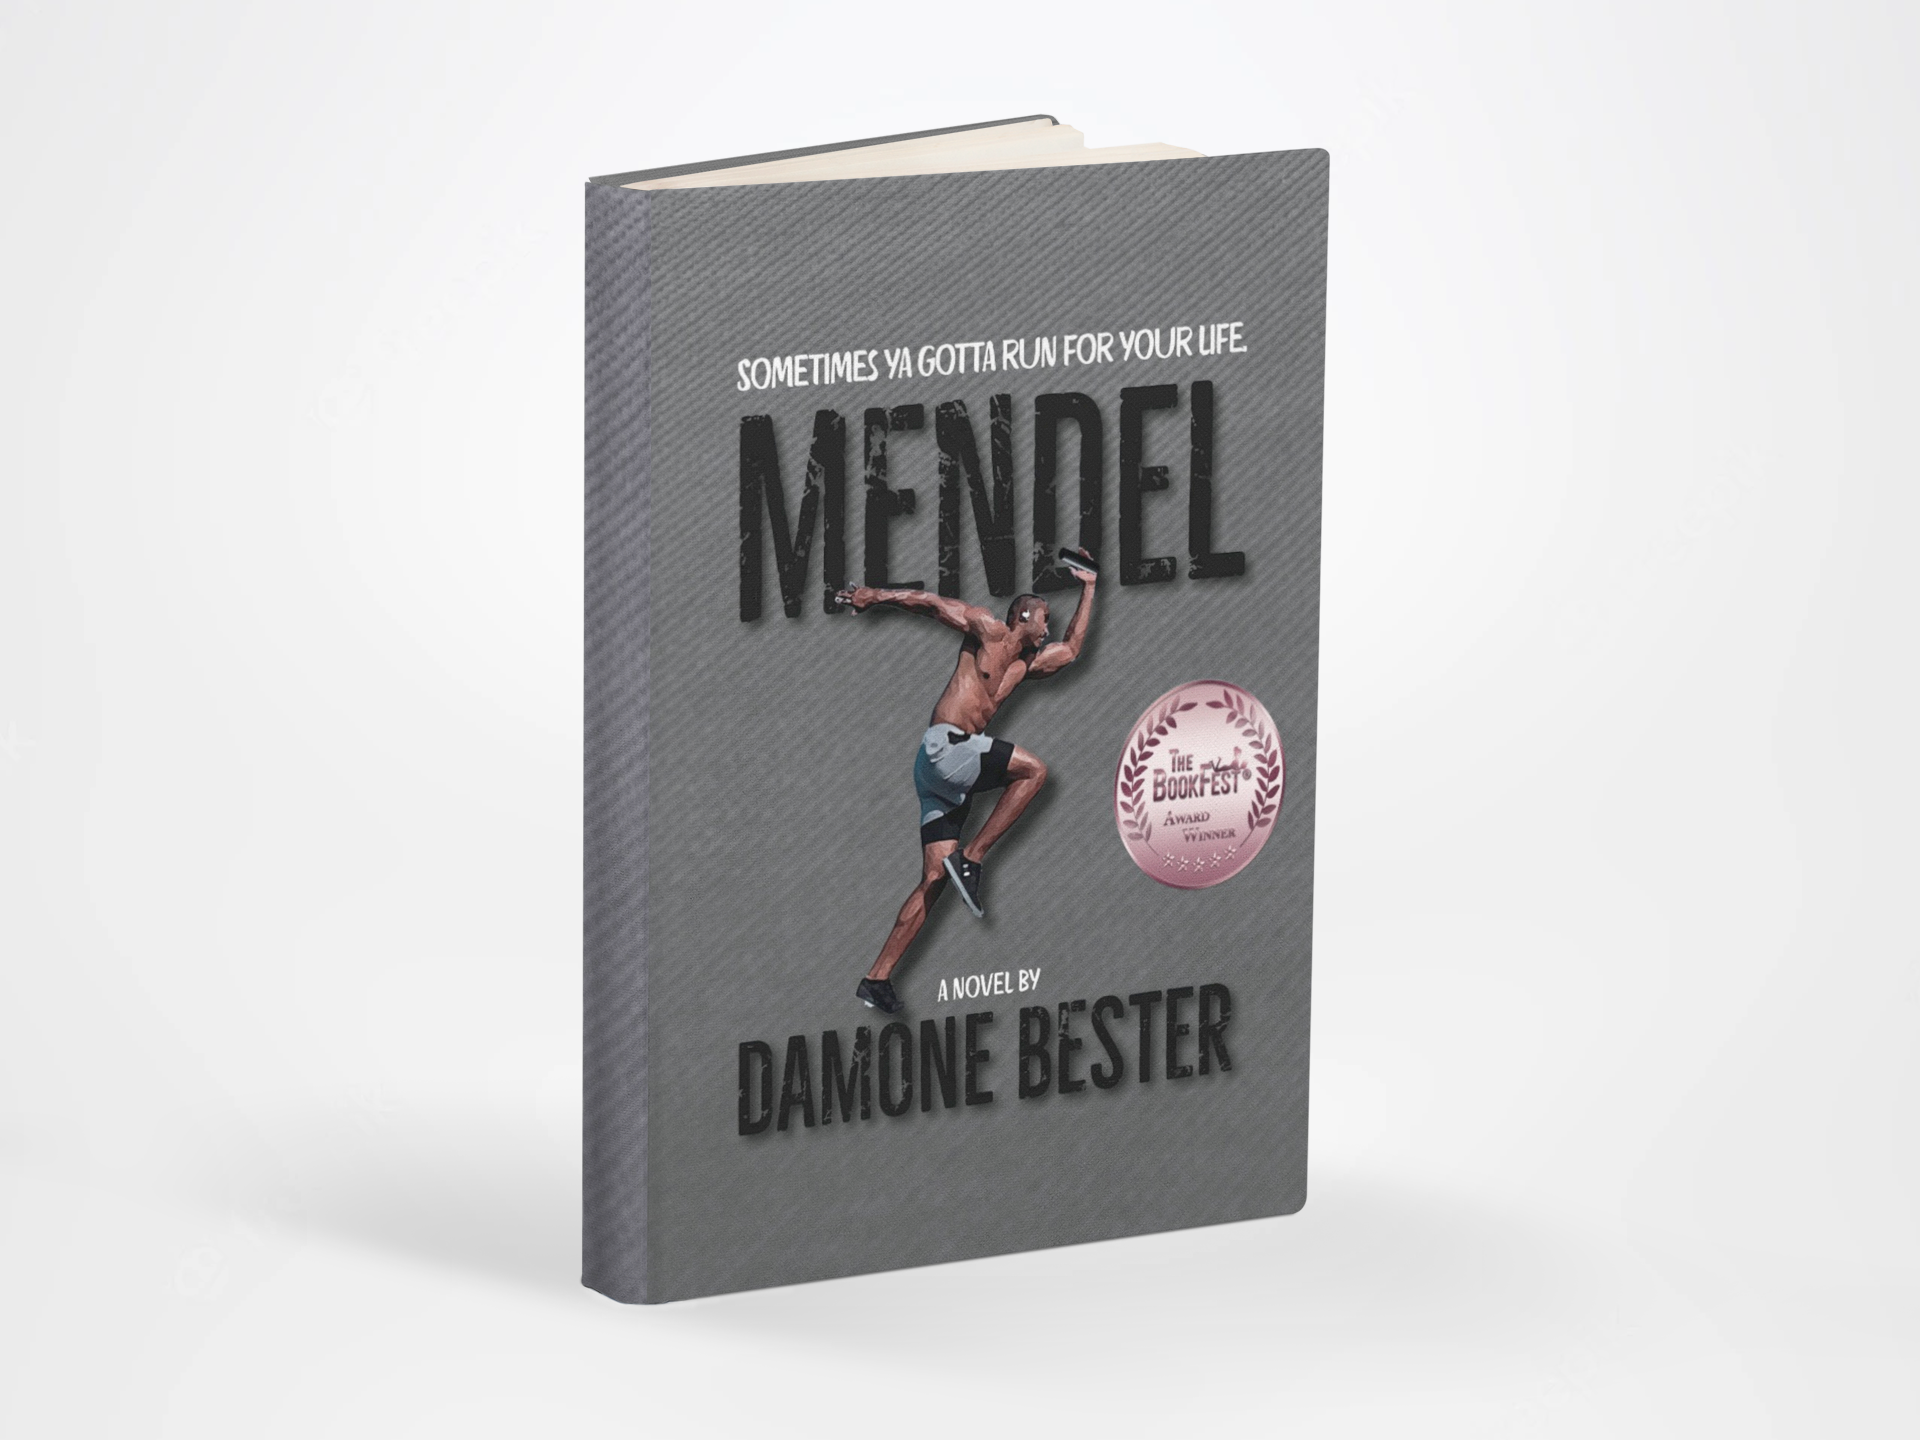 Mendel by Damone Bester is an Original Coming of Age Story About Family, Forgiveness, and Sacrifice